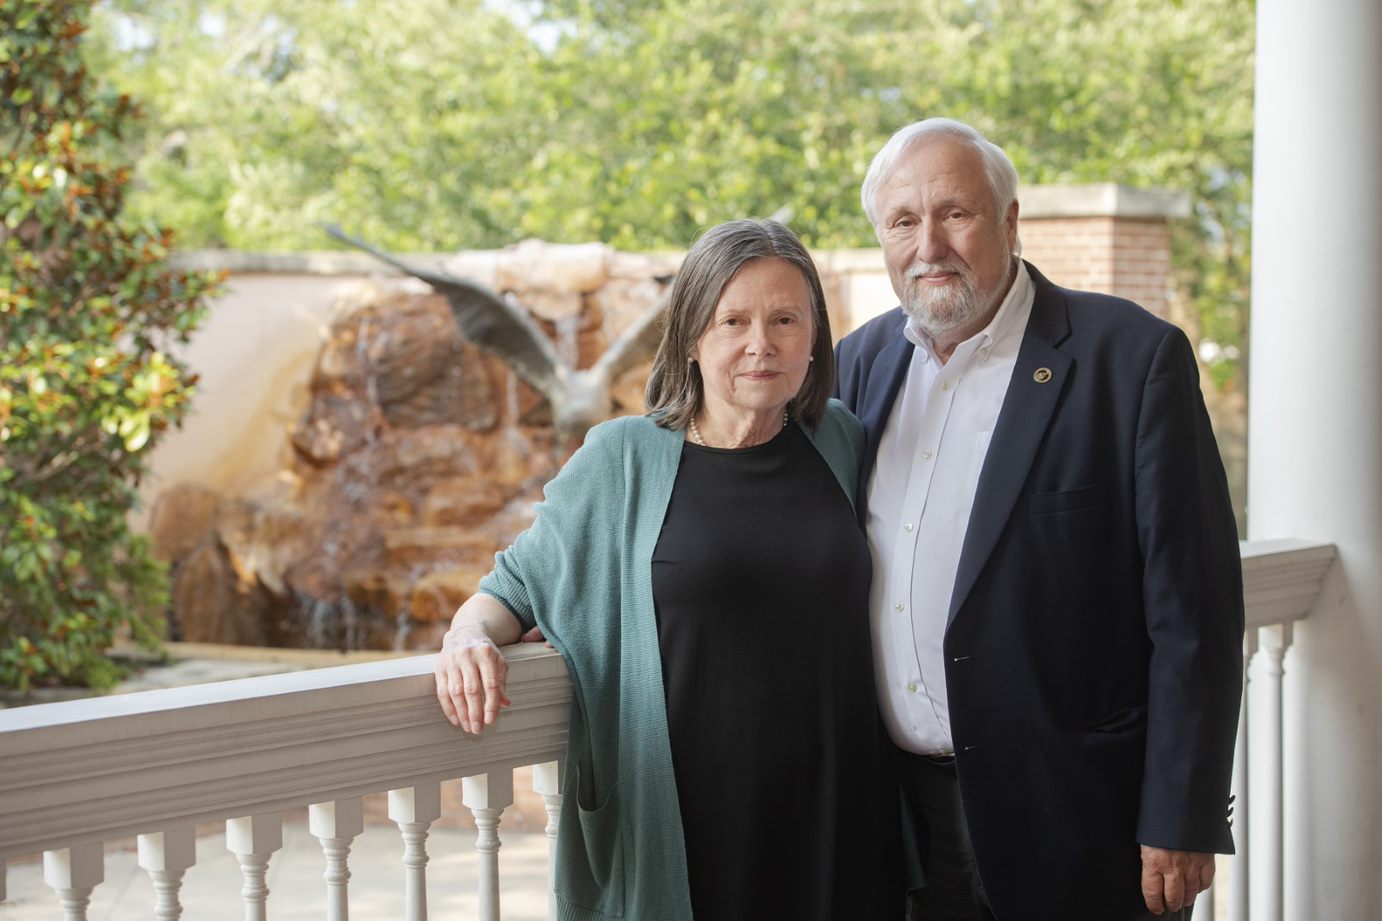 Dr. Sabine Heinhorst and Dr. Gordon Cannon, longtime members of the faculty and administration at The University of Southern Mississippi (USM), retired this summer after serving nearly 40 years apiece at the institution (USM photo by Kelly Dunn).